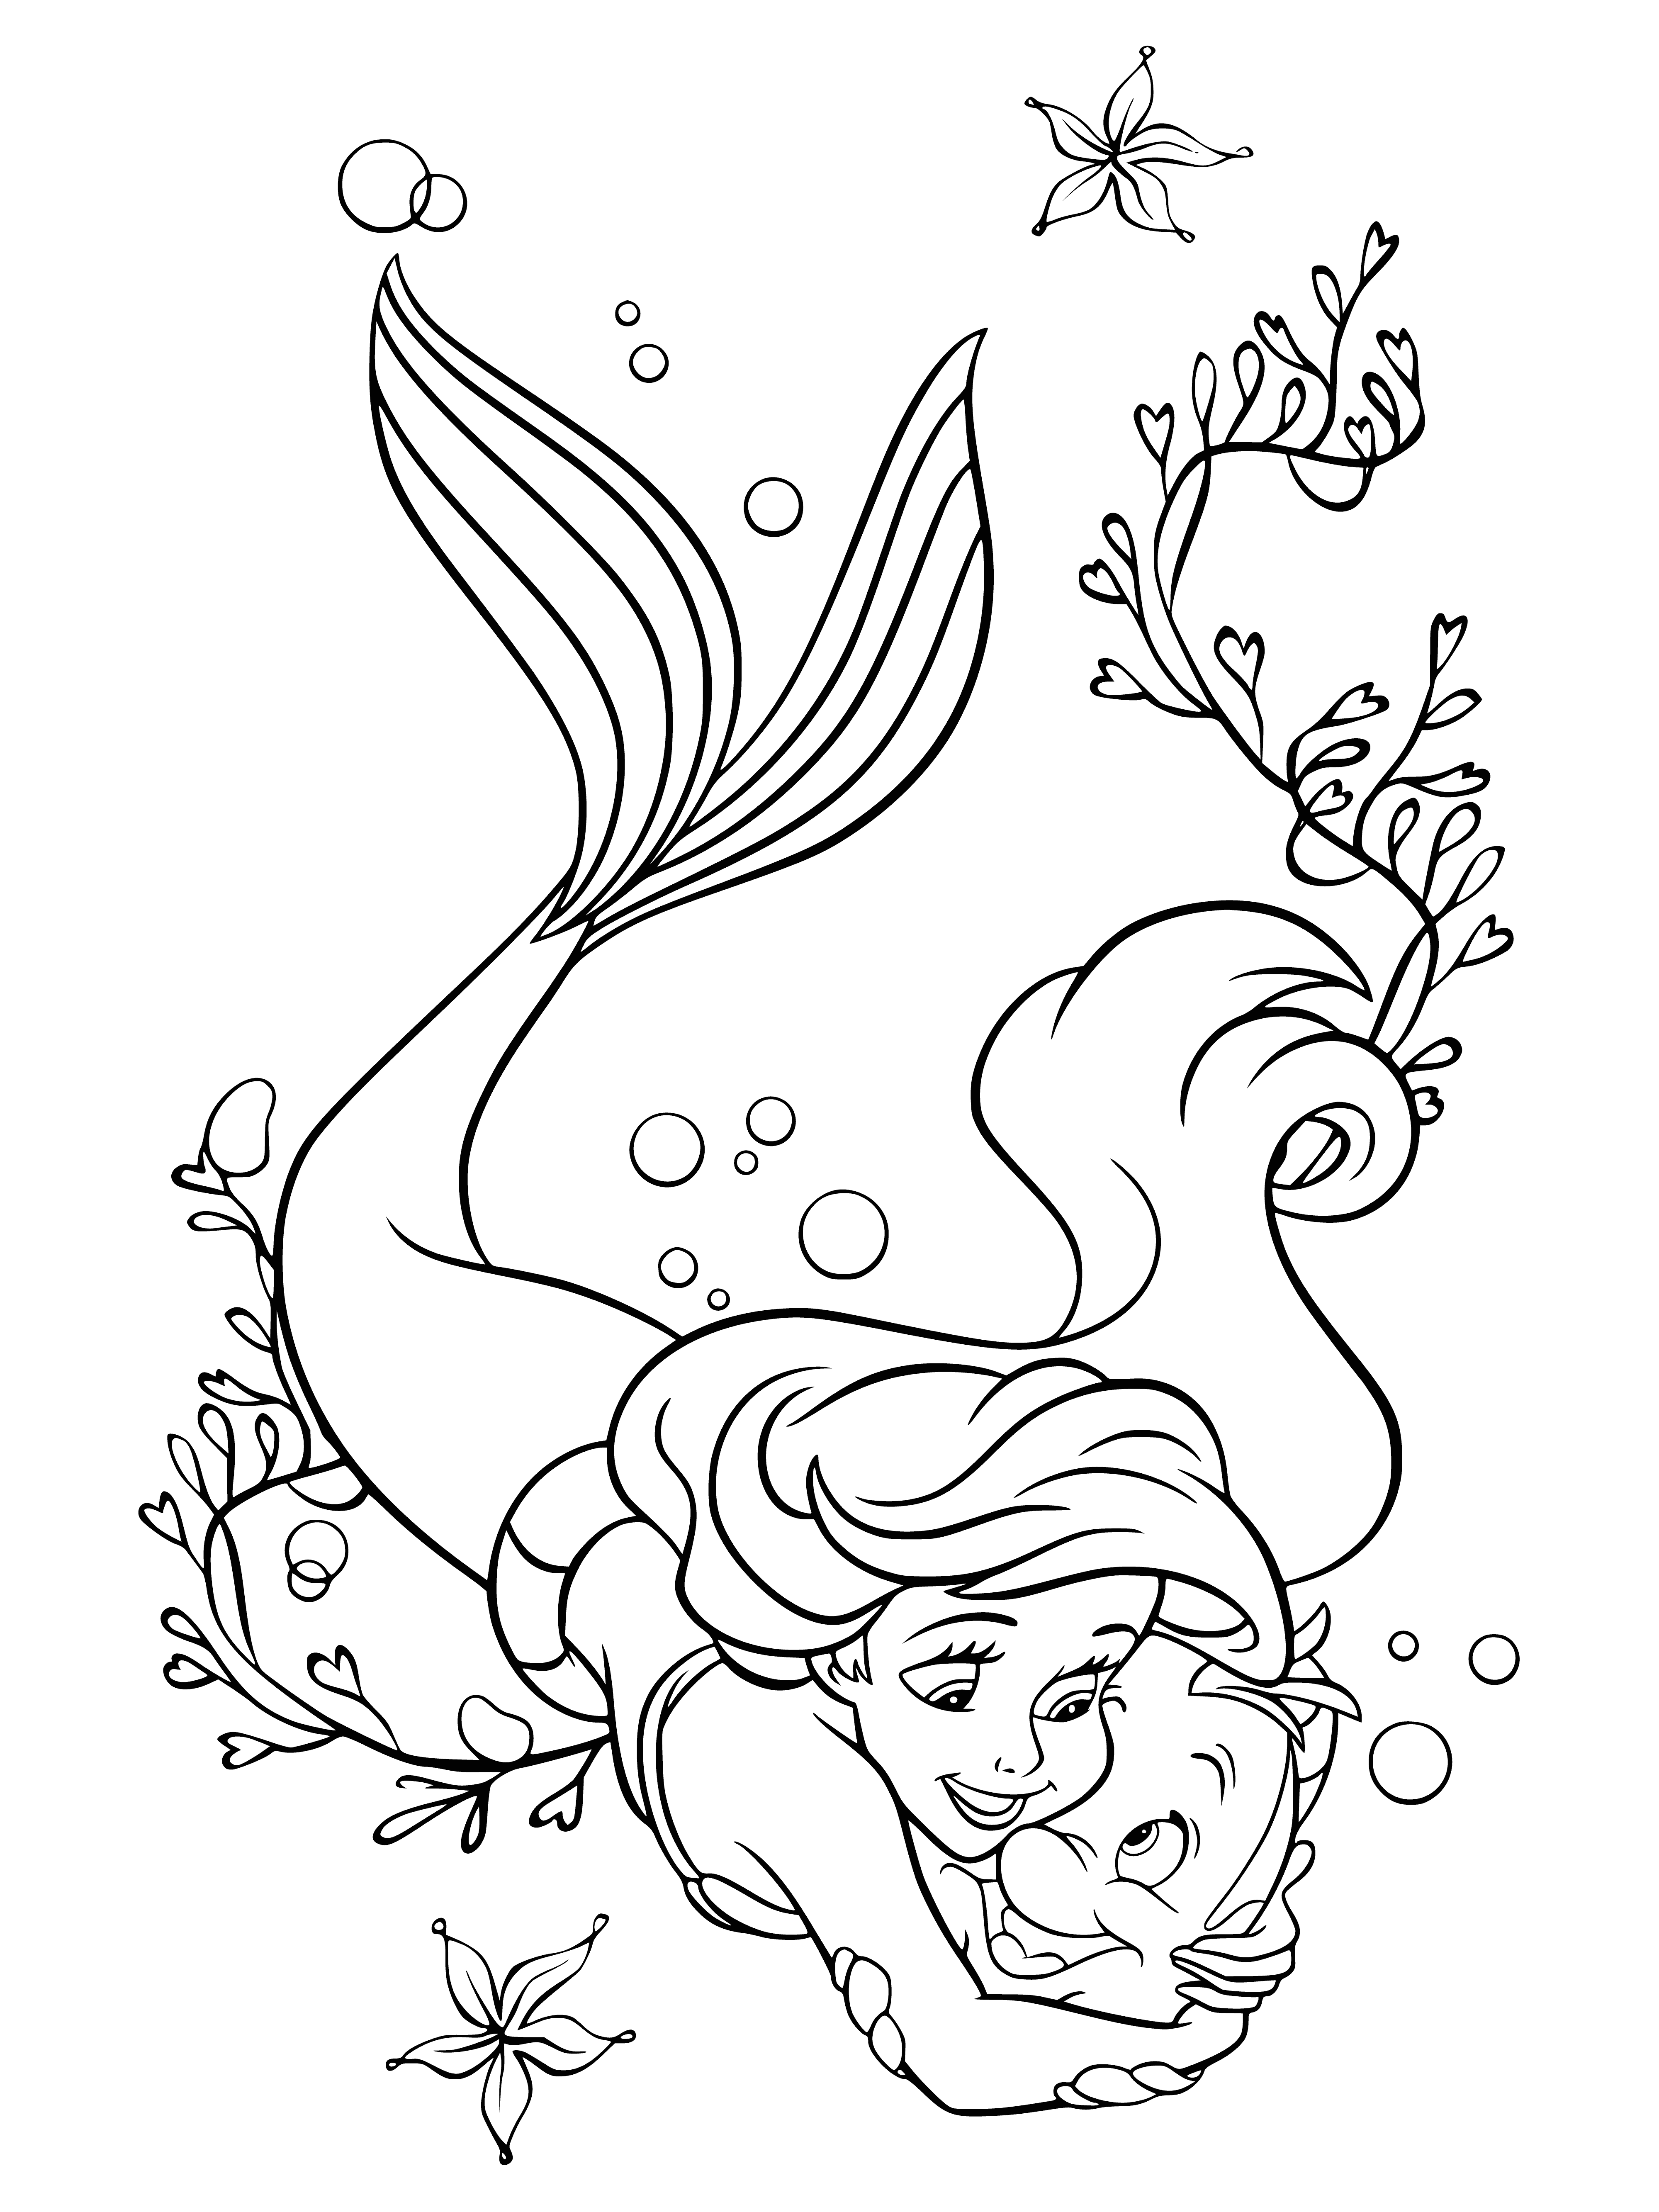 Little Mermaid and Flounder coloring page